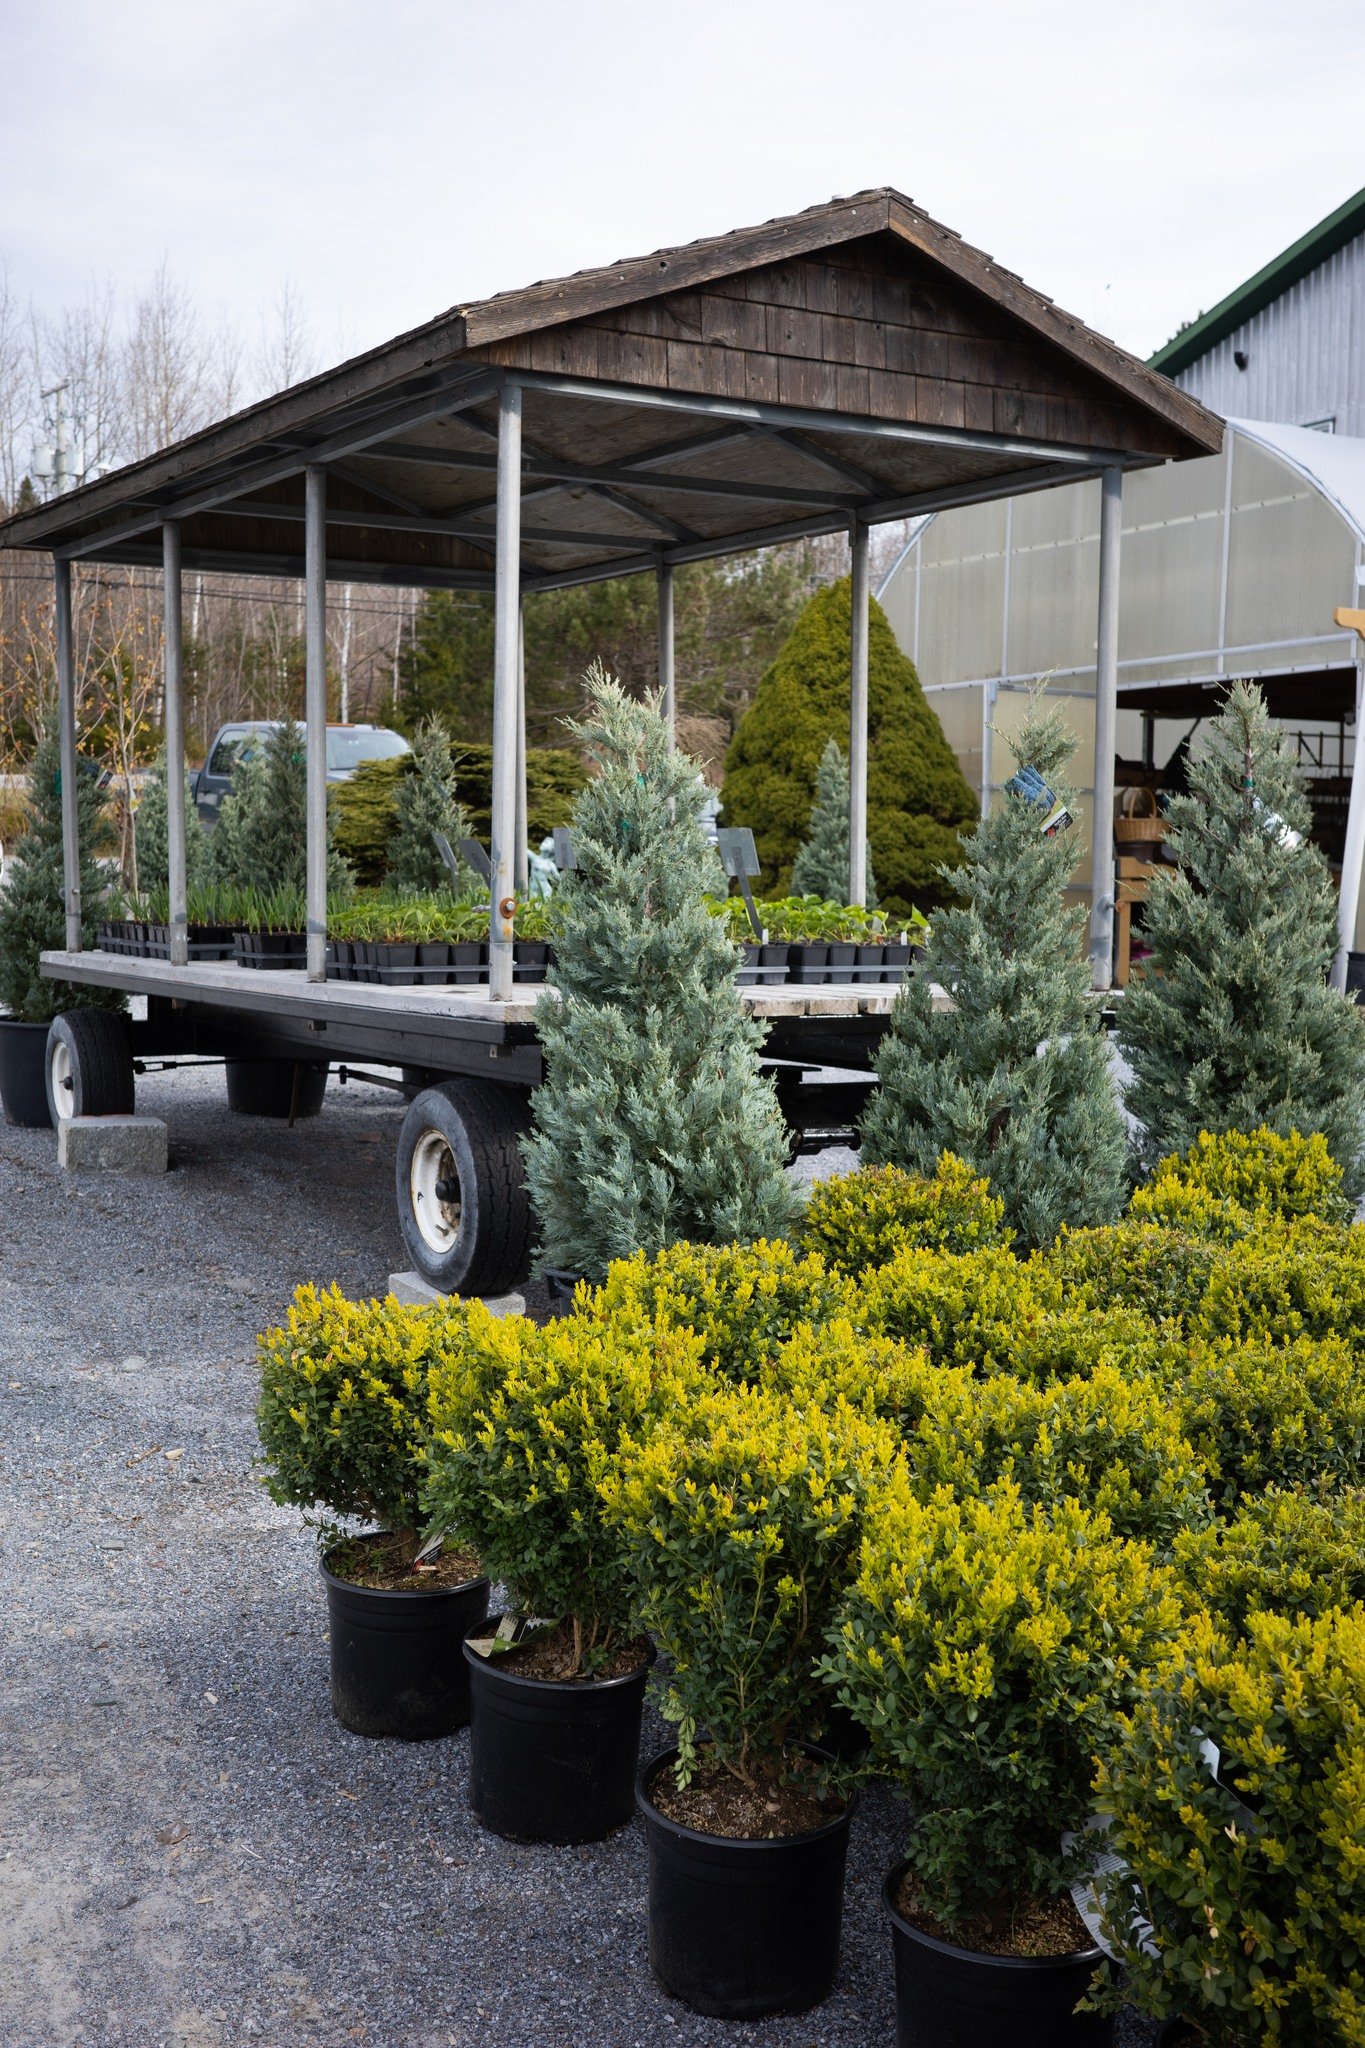 We have a new batch of Green Velvet and Green Mountain Boxwood in stock this week, along with a bunch of big beautiful Junipers!